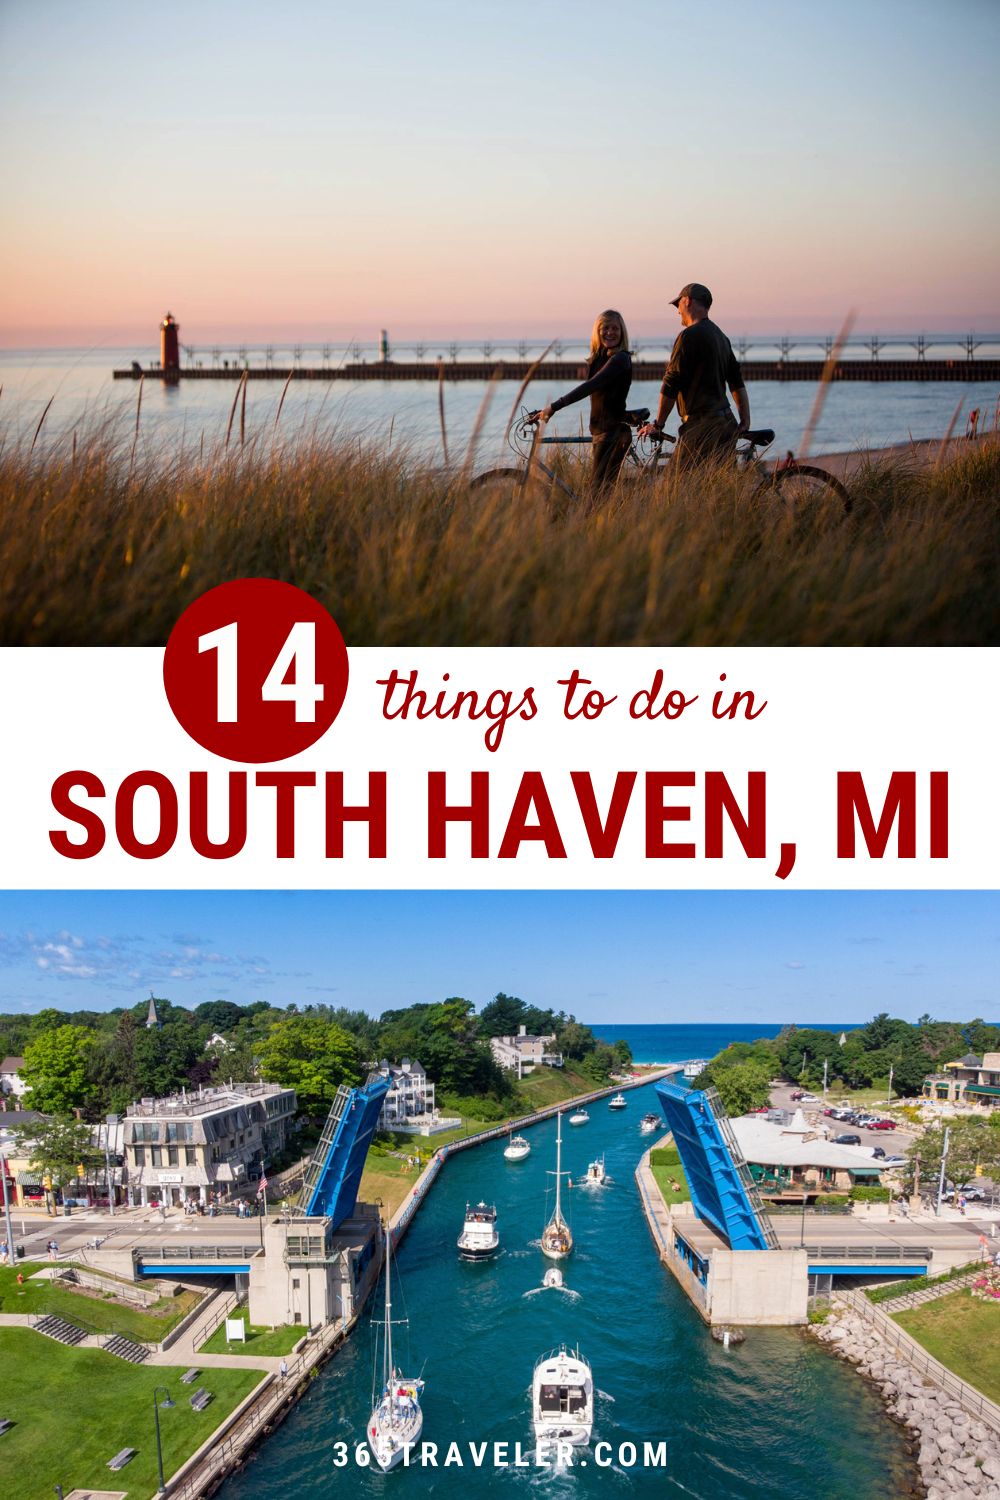 14 THINGS TO DO IN SOUTH HAVEN MI YOU CAN'T MISS